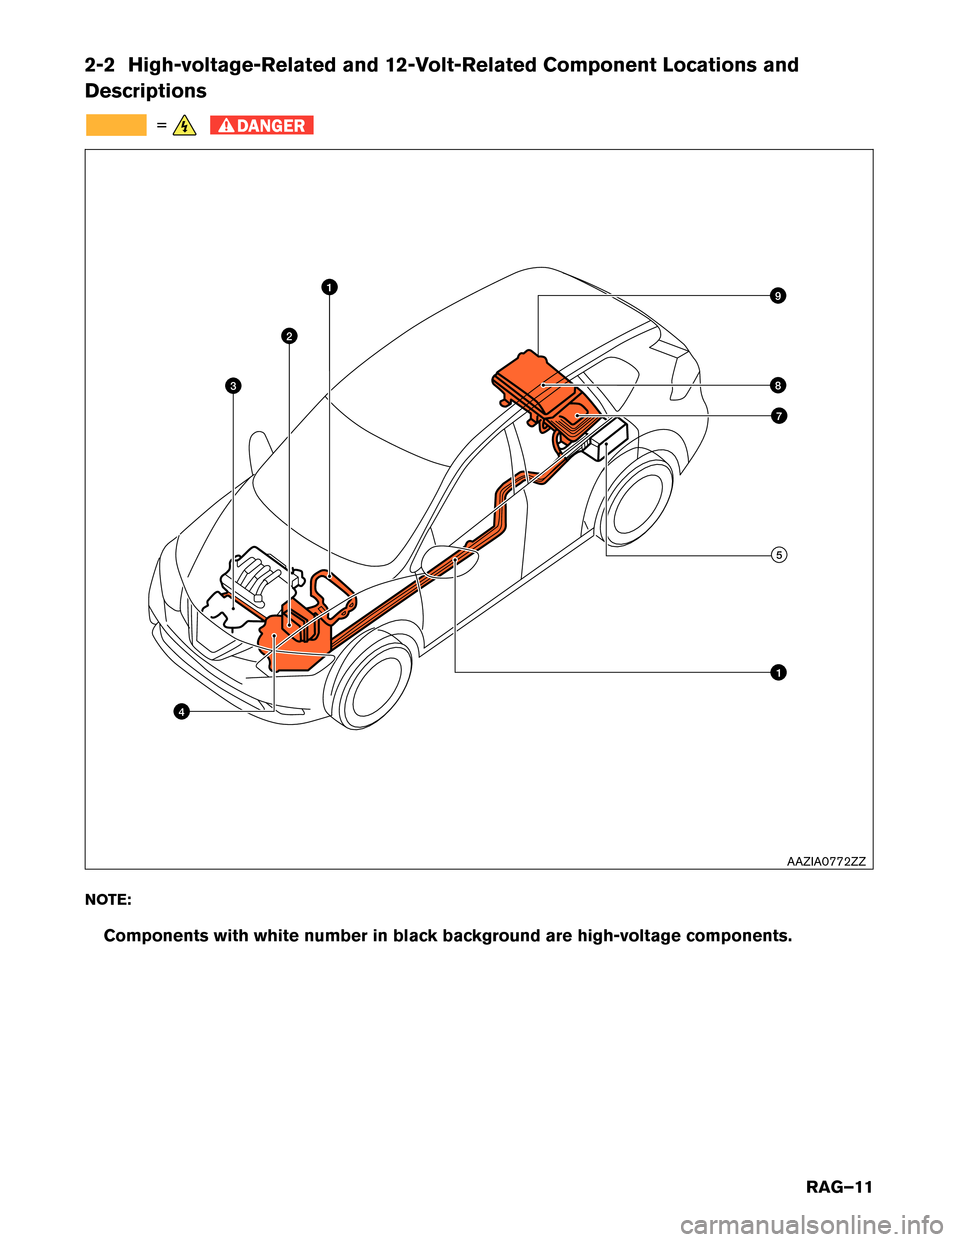 NISSAN ROGUE HYBRID 2017 2.G Roadside Assistance Guide 2-2 High-voltage-Related and 12-Volt-Related Component Locations and
Descriptions
=
DANGER
NOTE:
Components with white number in black background are high-voltage components. 8
7
4 1
2
3 9
15
AAZIA077